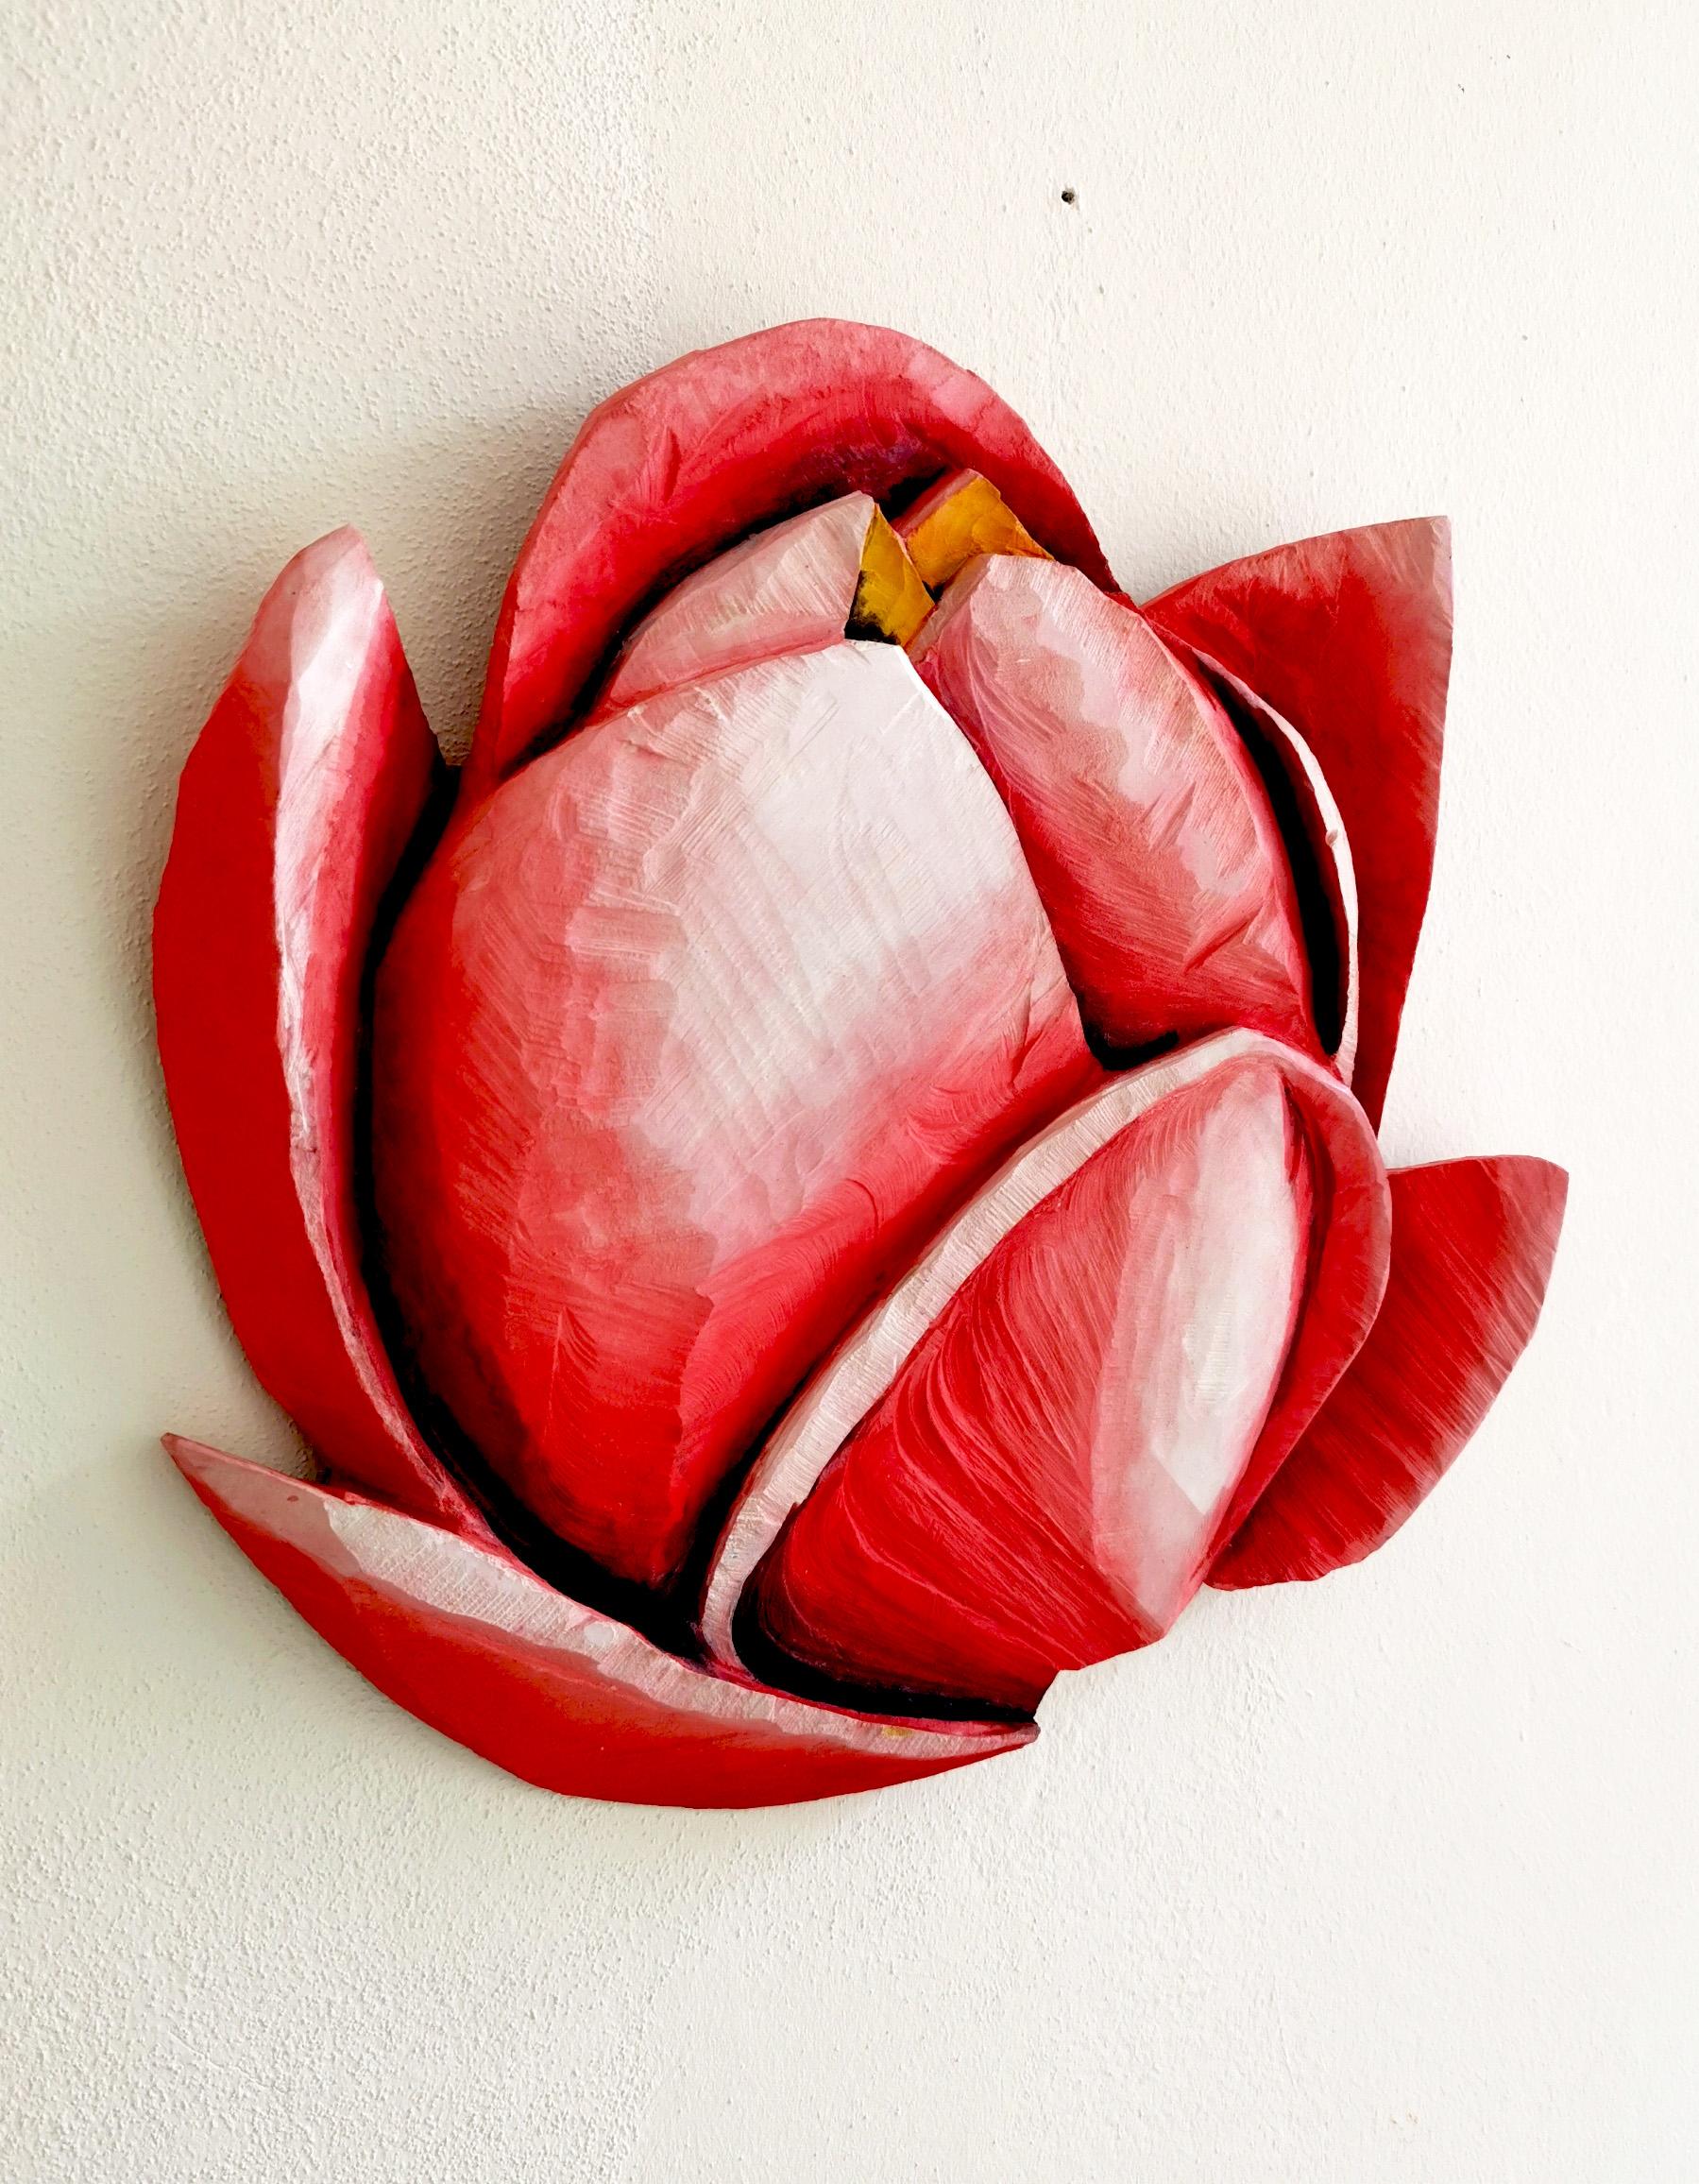 Bloom 3 by Isabel Ritter - Contemporary Wall Flower sculpture  4